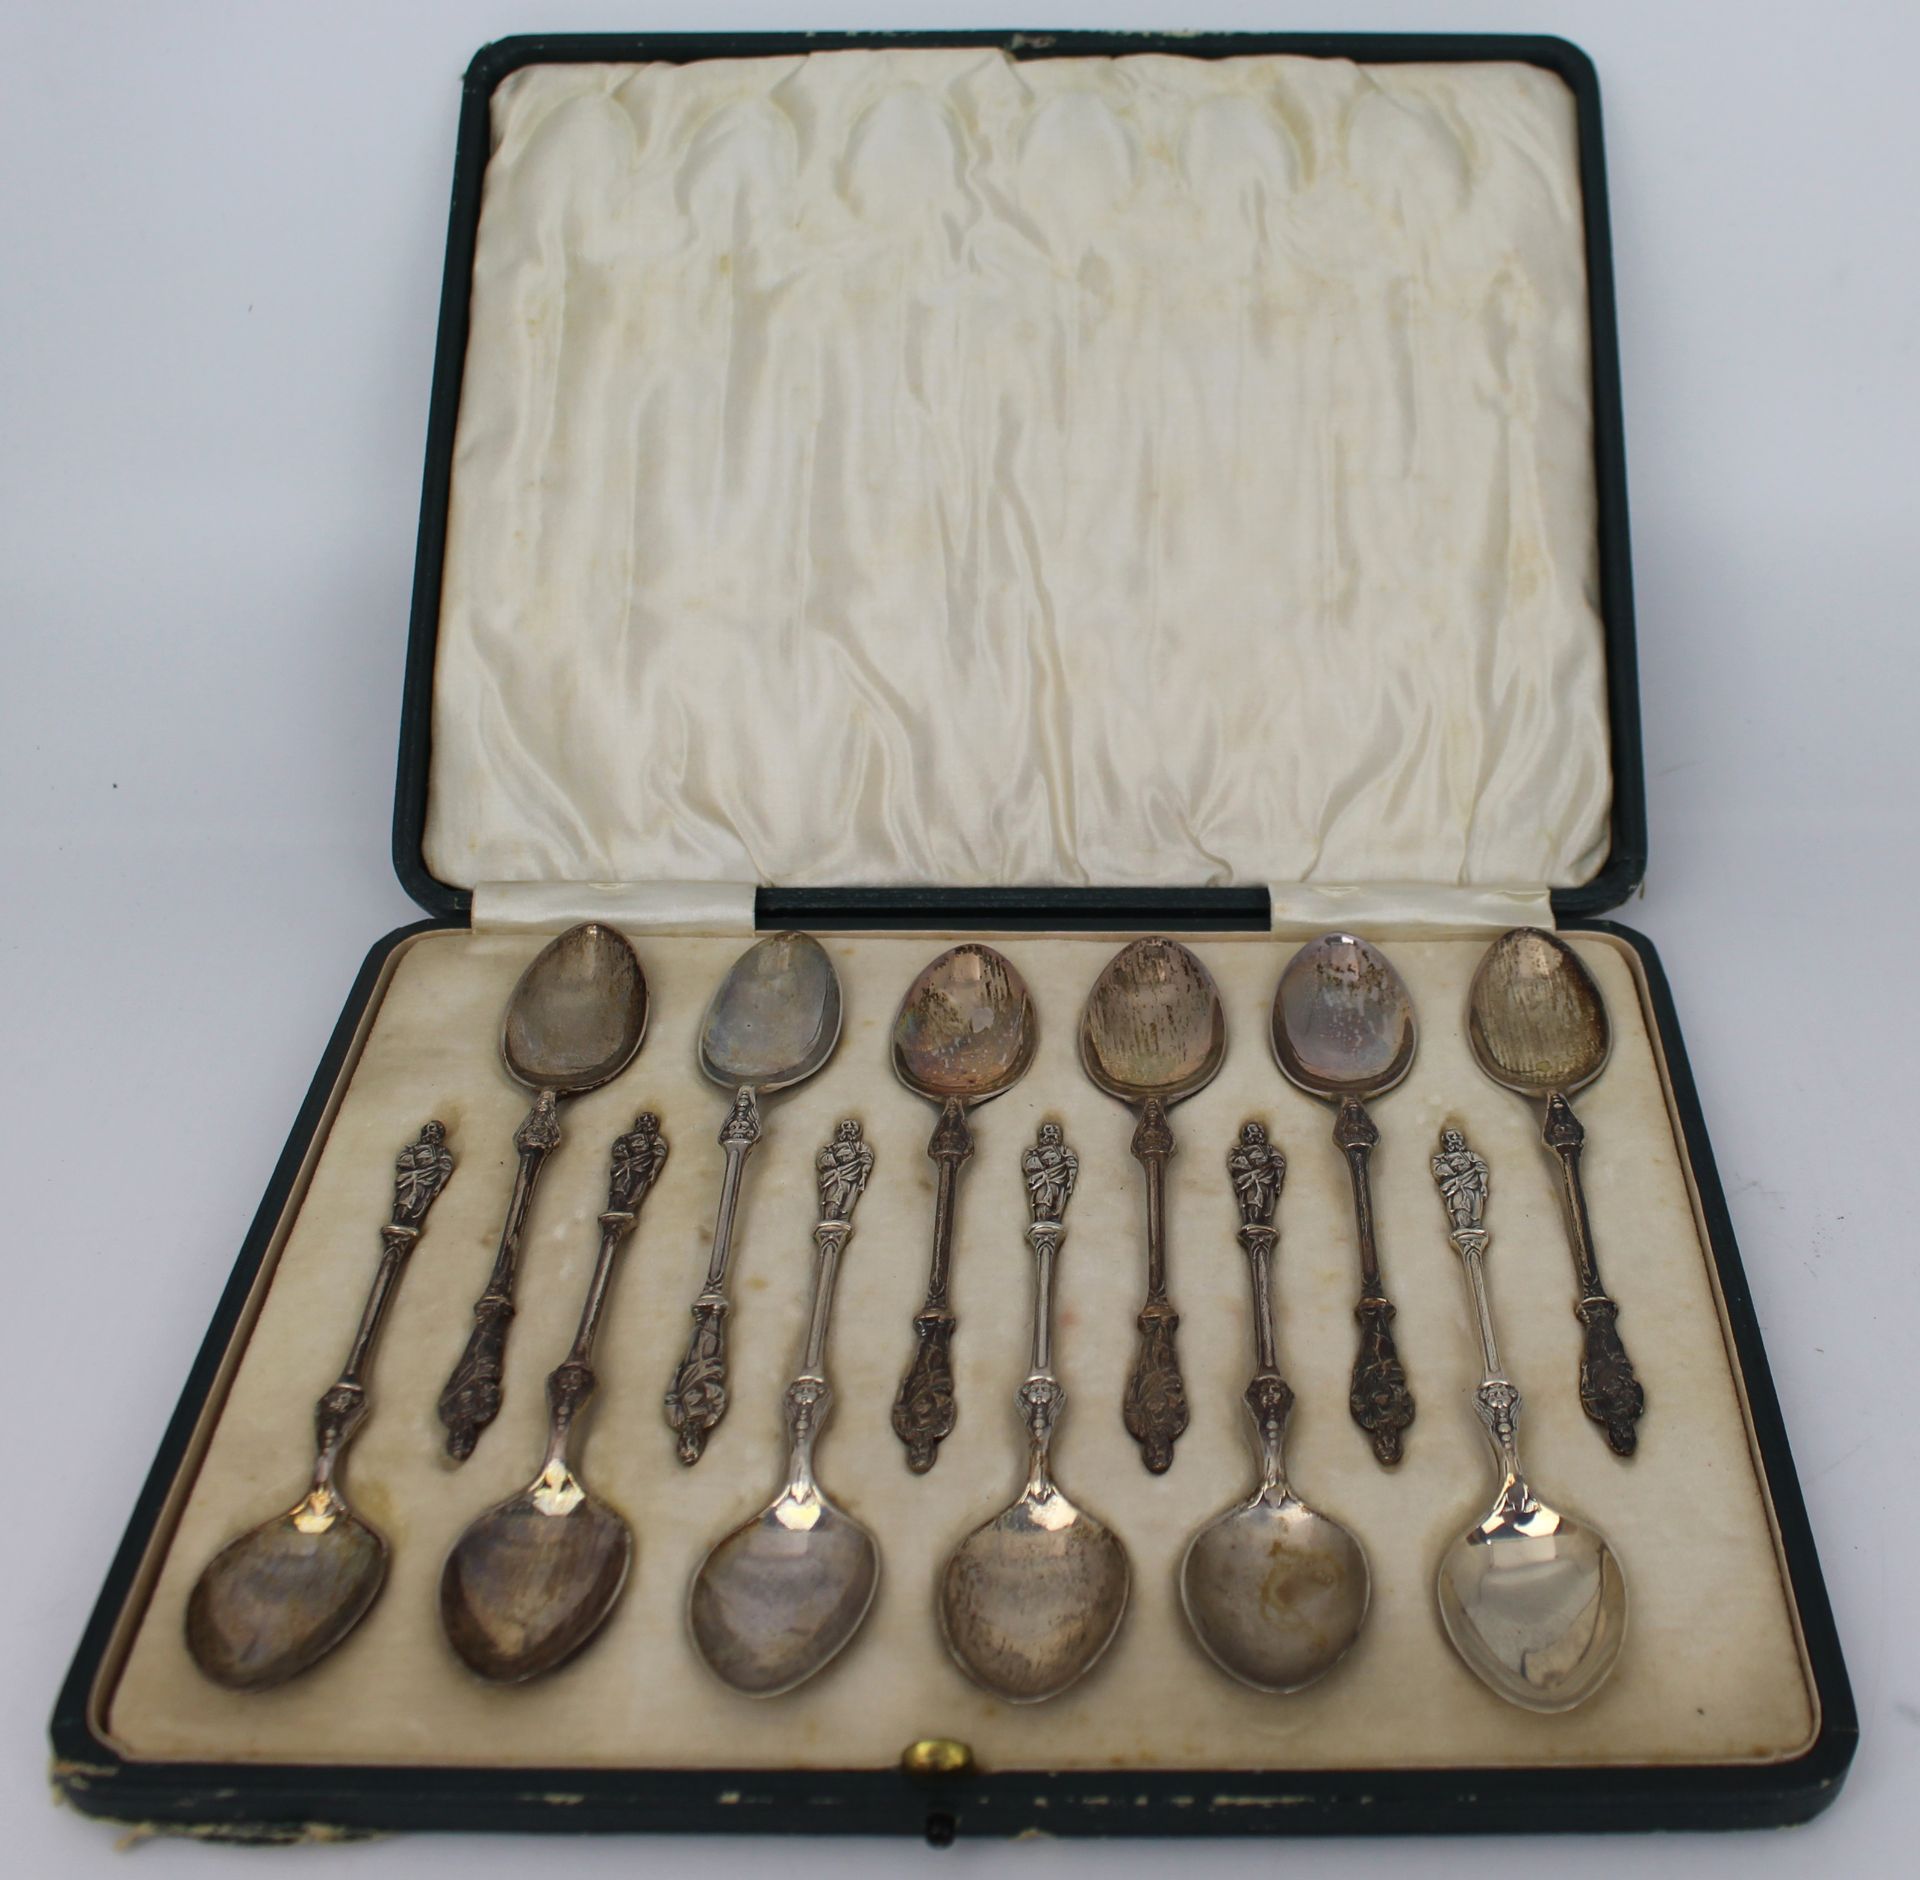 Cased Set of 12 Apostle Spoons by Charles Wilkes 1914